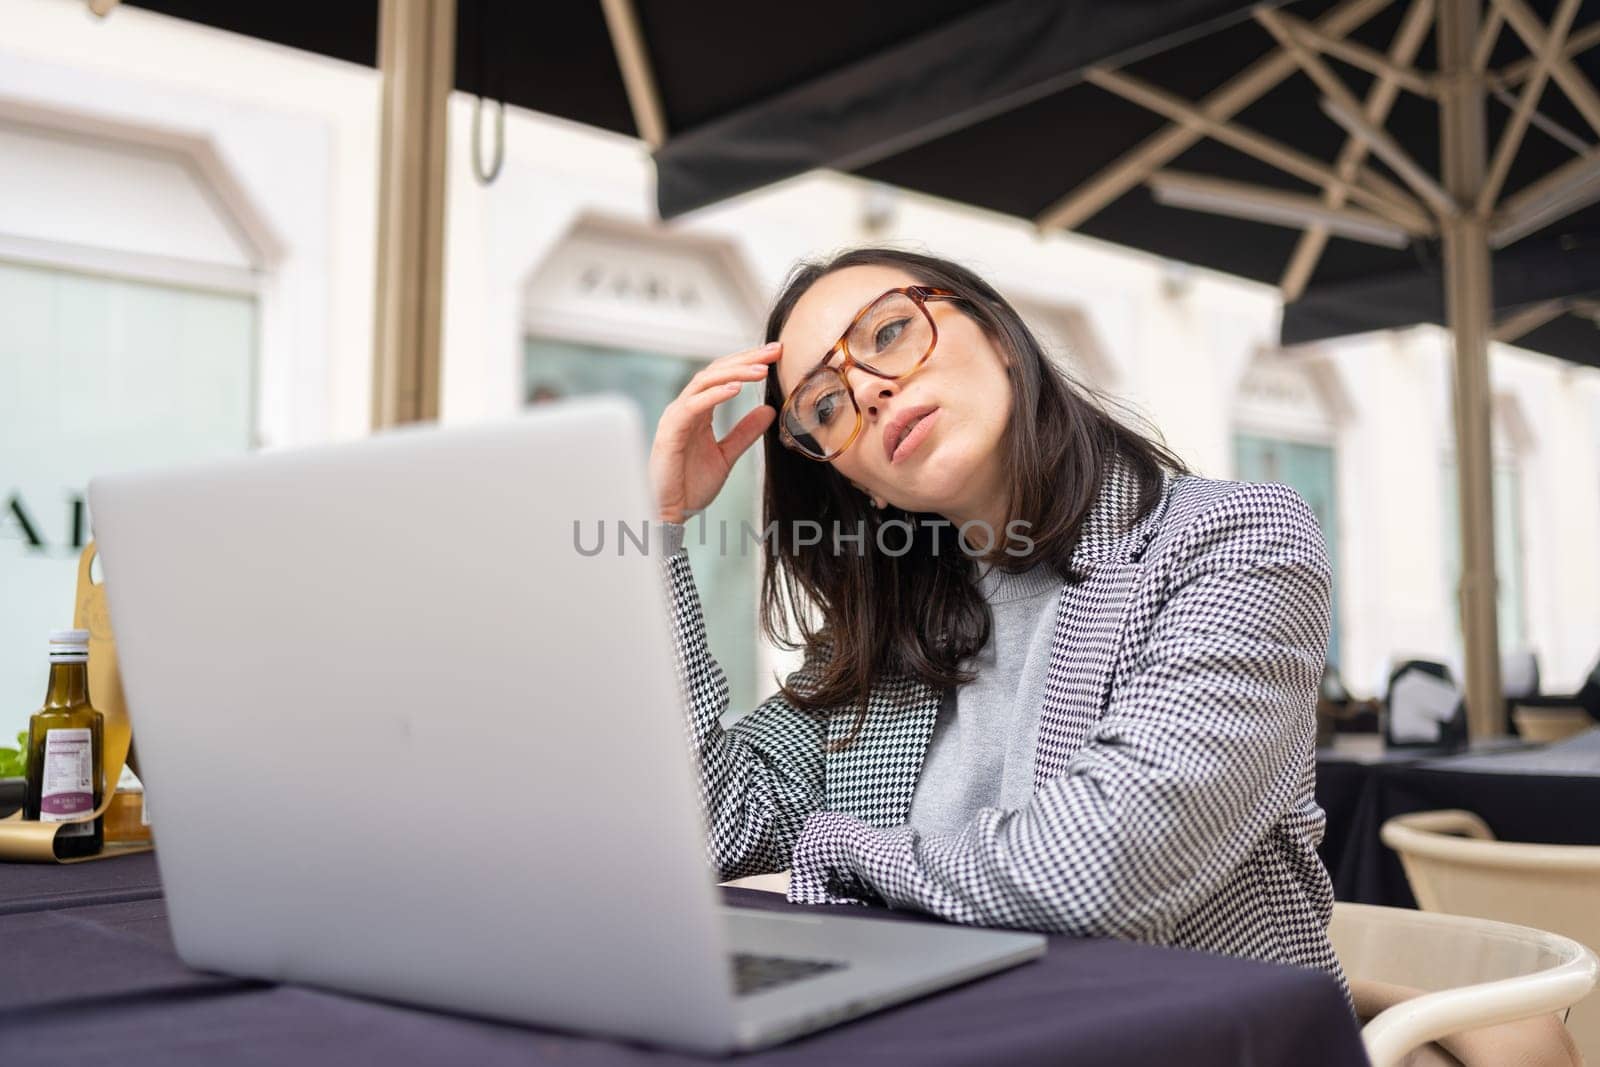 Tired business woman in stress works at laptop while sitting at cafe table on street and holds her hand on her temples, migraine attack. Freelance overworked